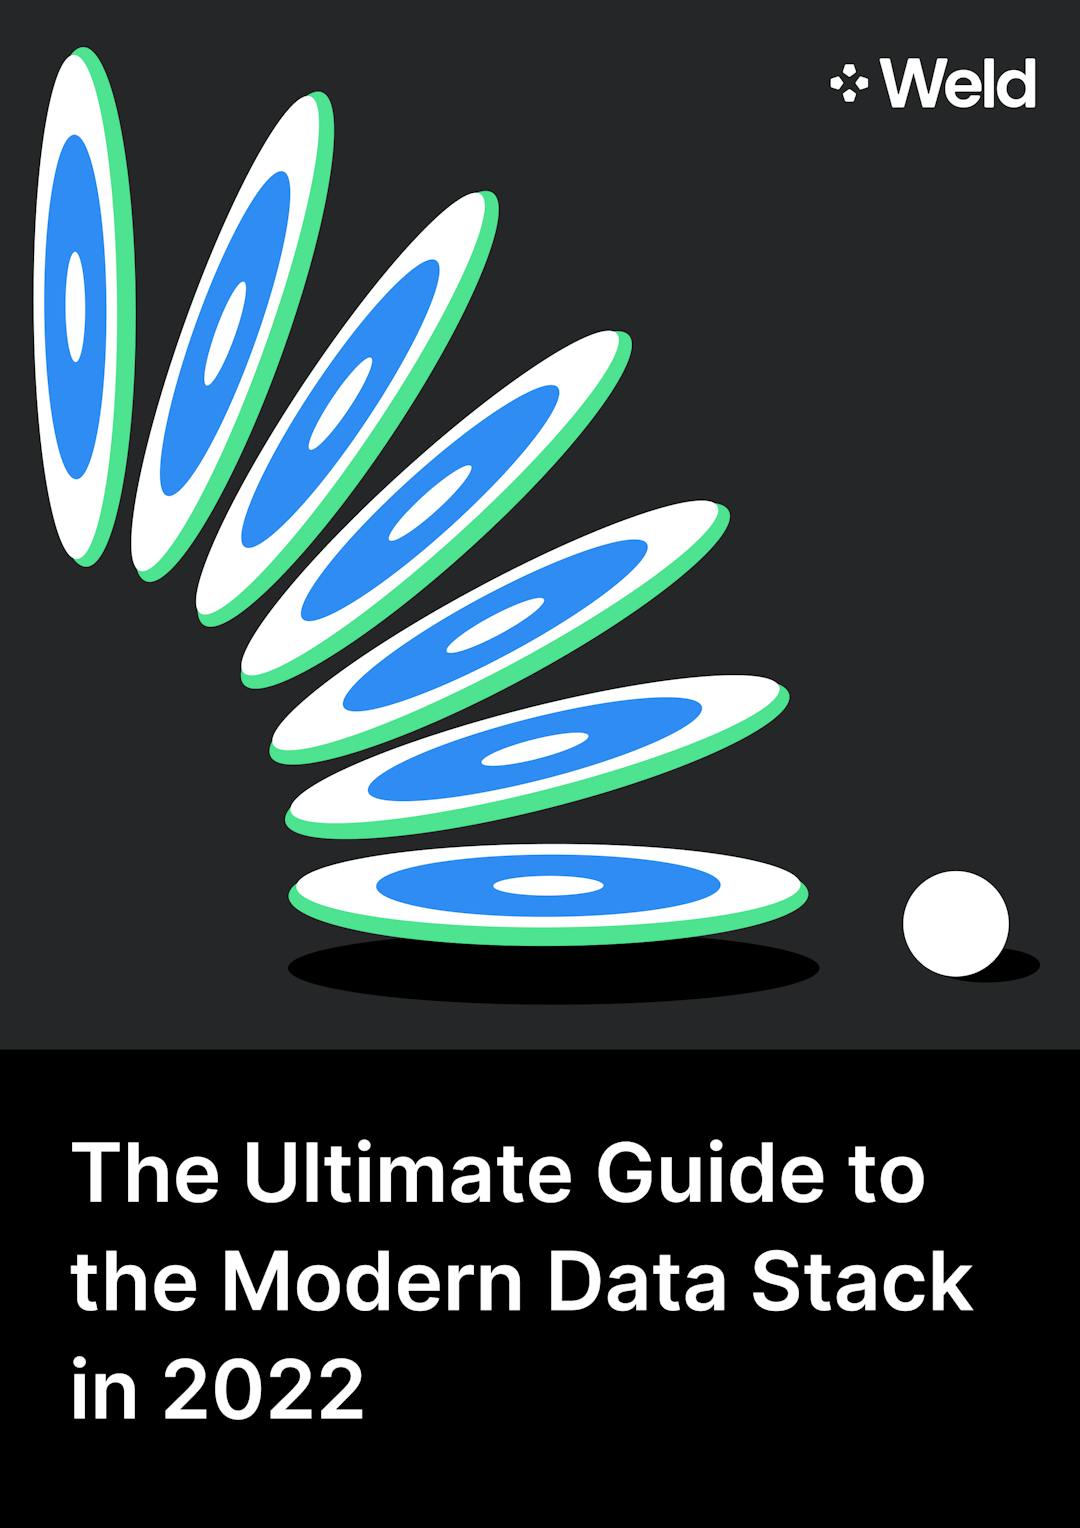 The Ultimate Guide to the Modern Data Stack cover image